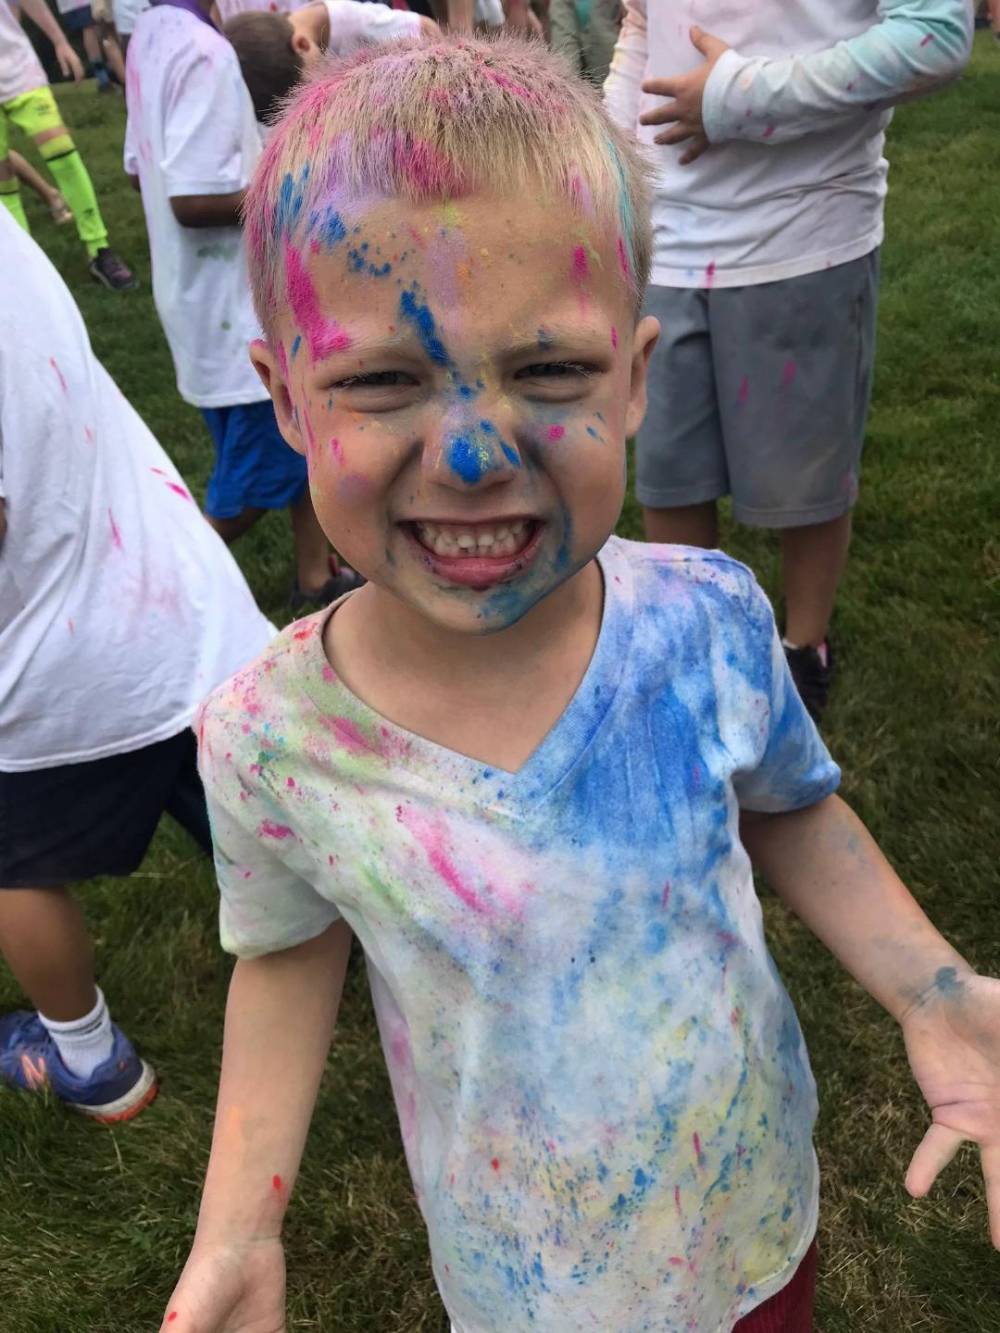 TOP ILLINOIS SPORTS CAMP: Good Times Day Camp Libertyville is a Top Sports Summer Camp located in Libertyville Illinois offering many fun and enriching Sports and other camp programs. Good Times Day Camp Libertyville also offers CIT/LIT and/or Teen Leadership Opportunities, too.